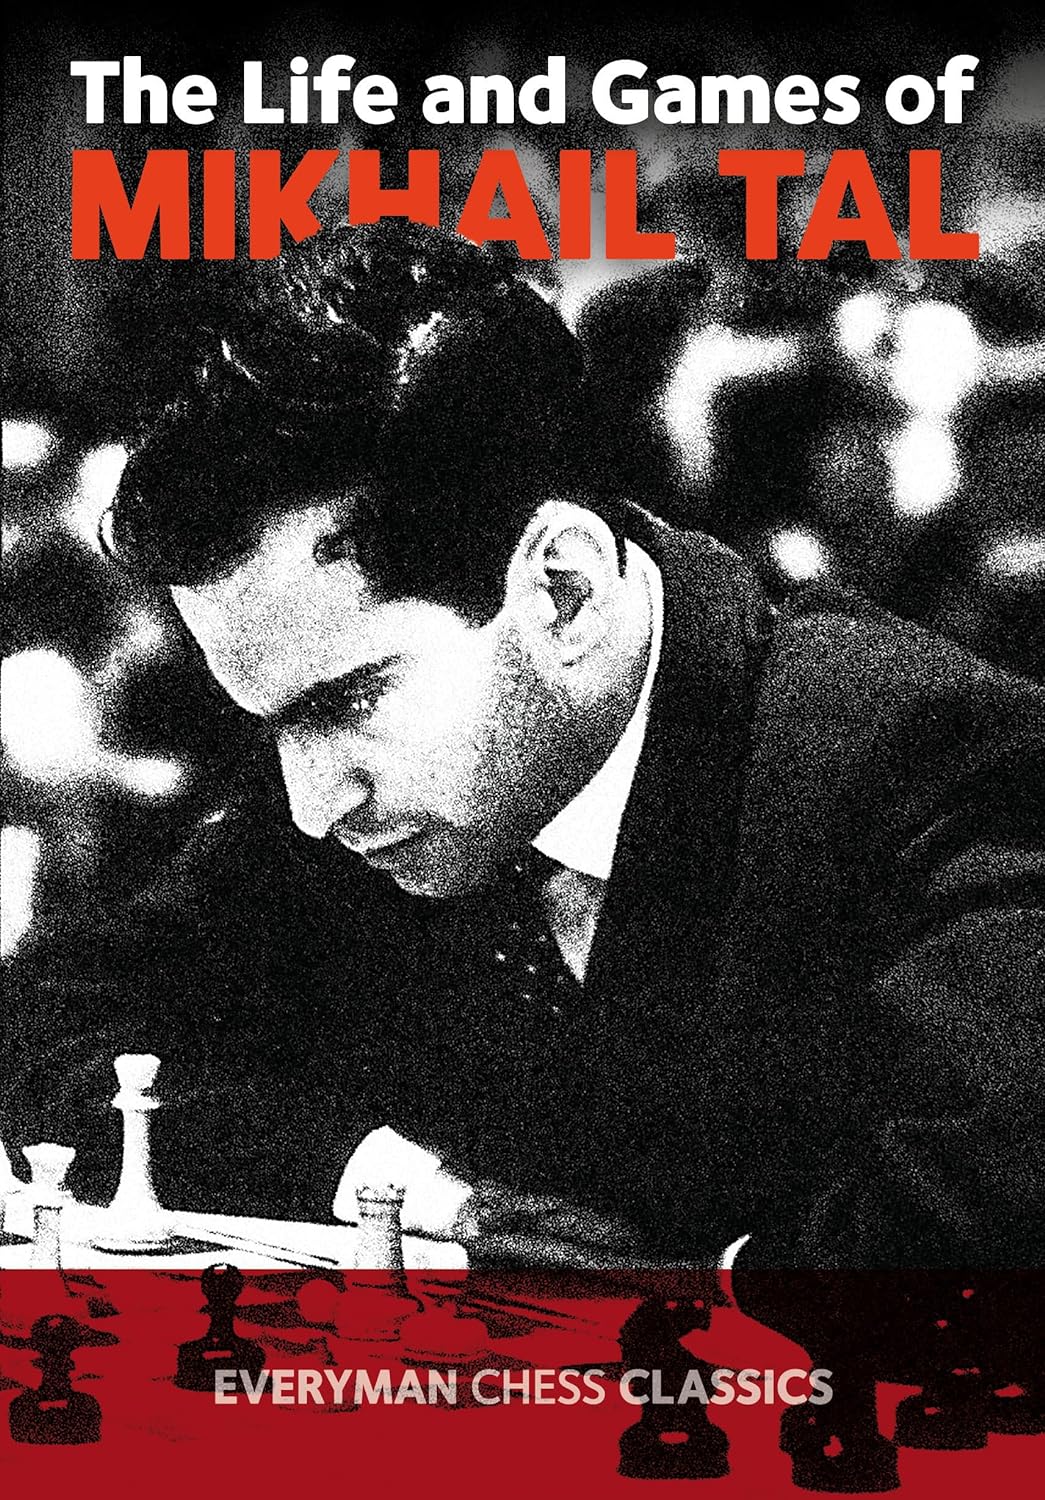 Life and Games of Mikhail Tal by Mikhail Tal